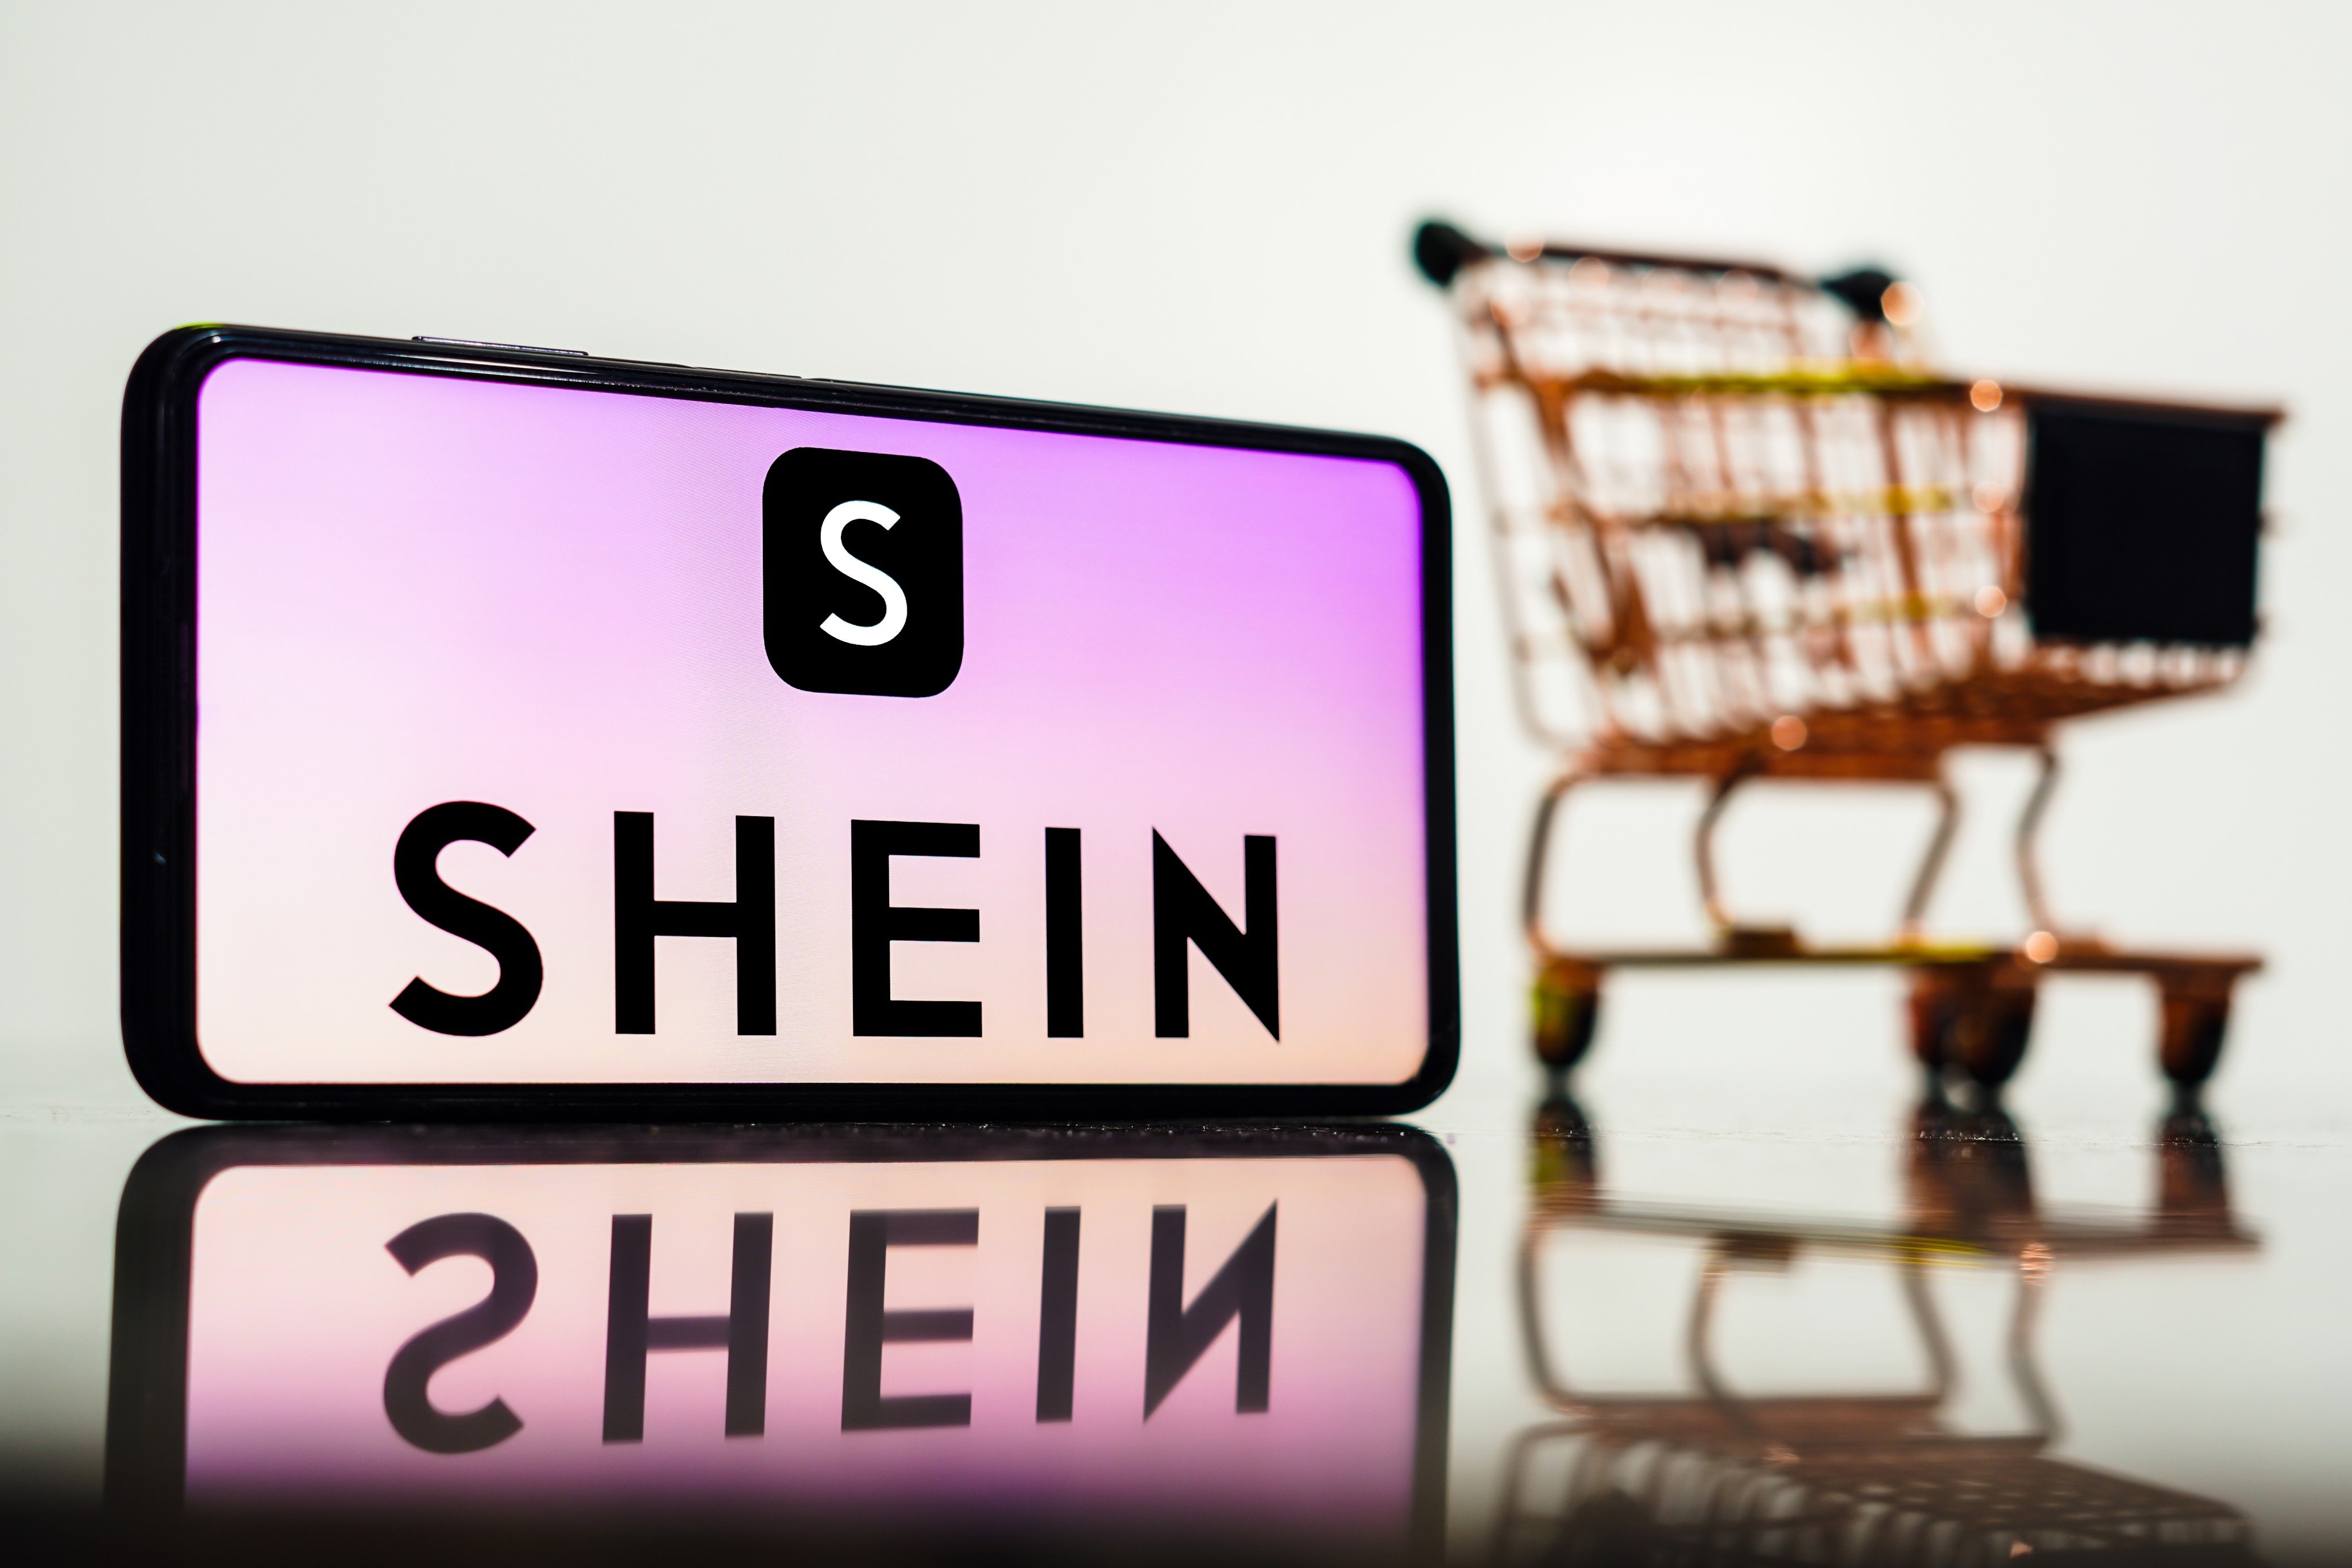 Shein was founded 15 years ago in Nanjing, capital of eastern Jiangsu province, and is now doing business in more than 150 countries. Photo: Shutterstock